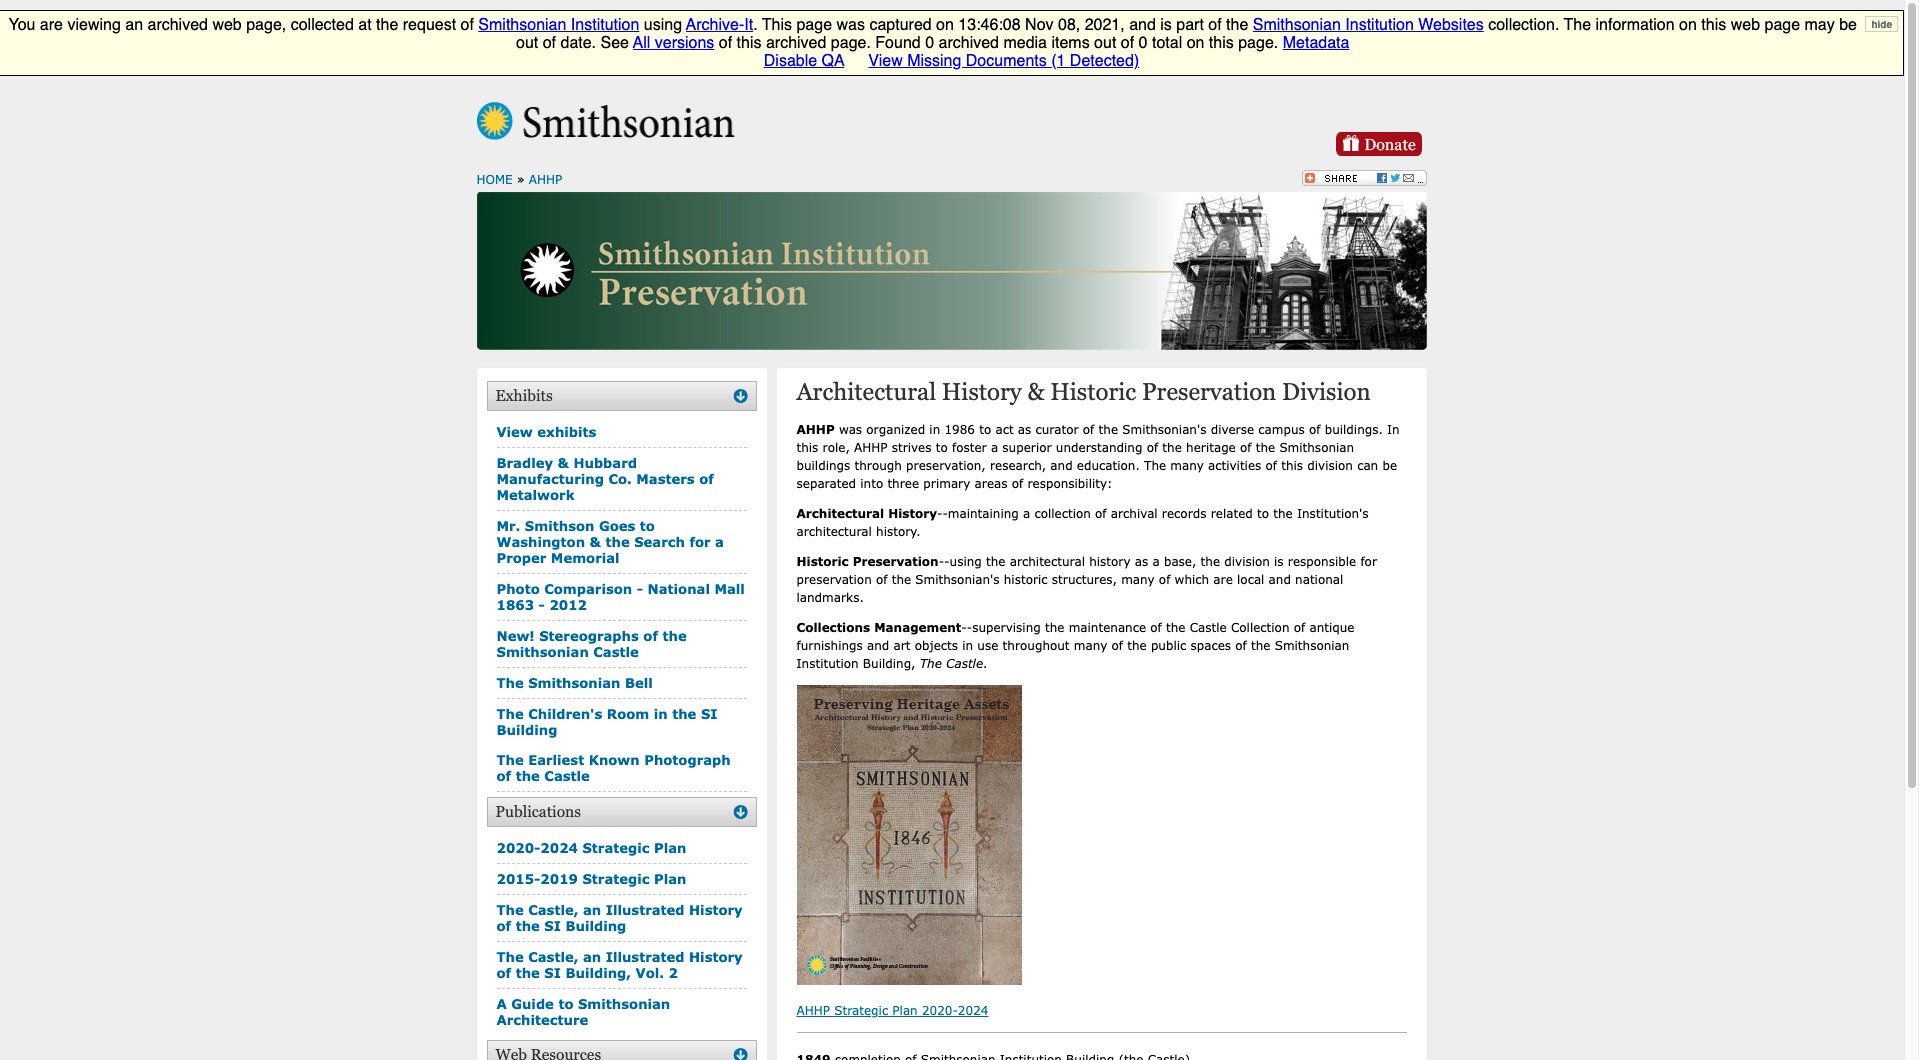 Screenshots of Architectural History &amp; Historic Preservation Division archived website that show